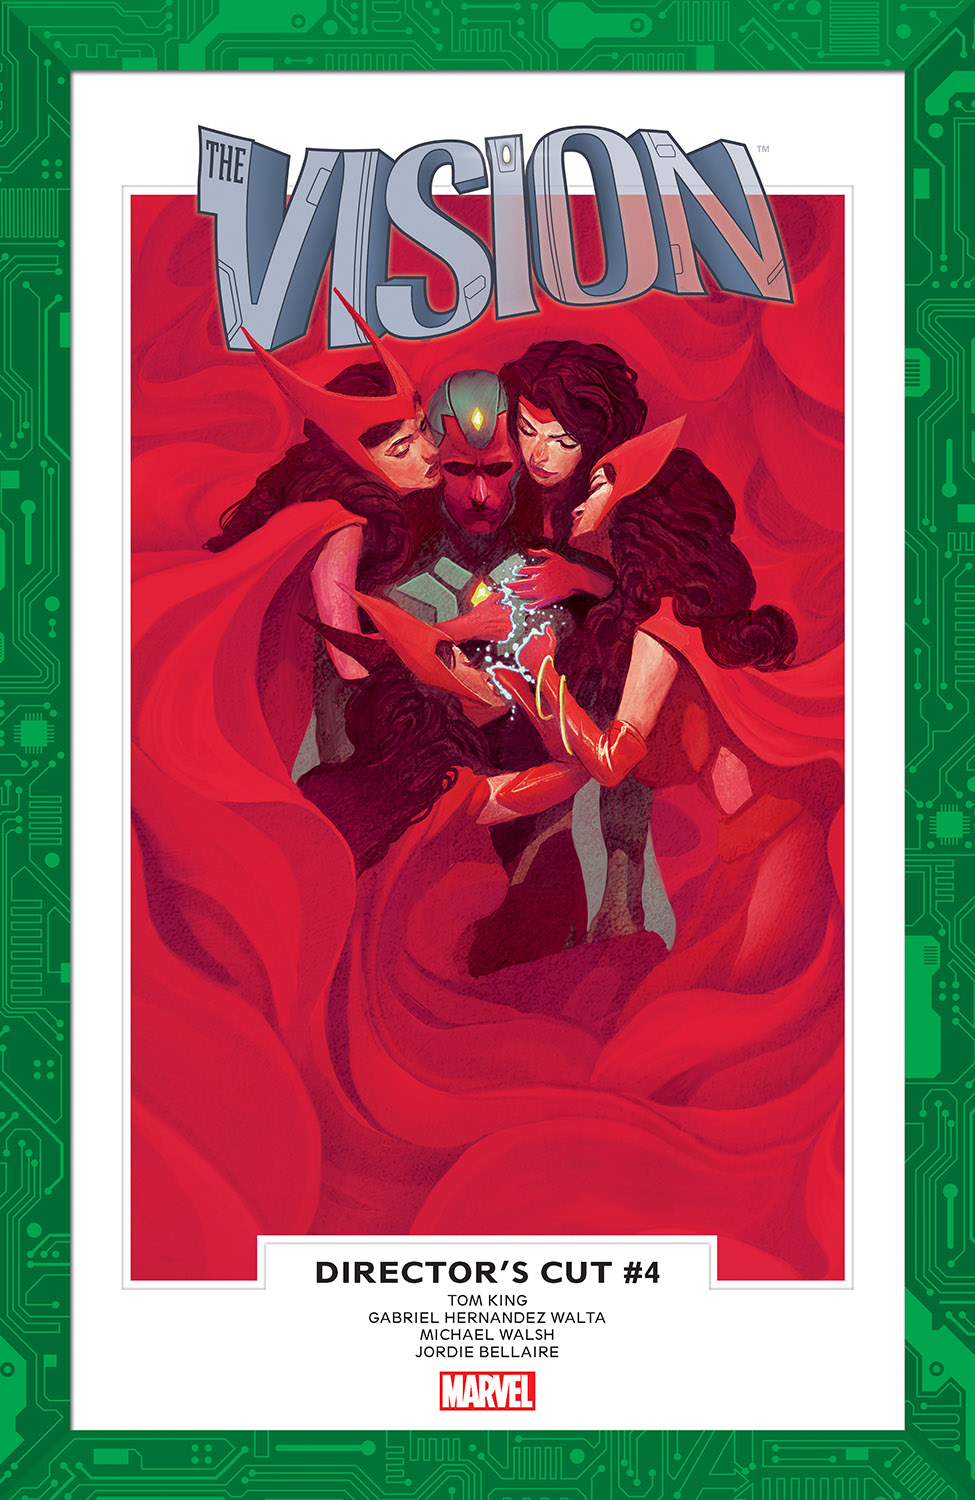 Vision Director's Cut (2017) #4